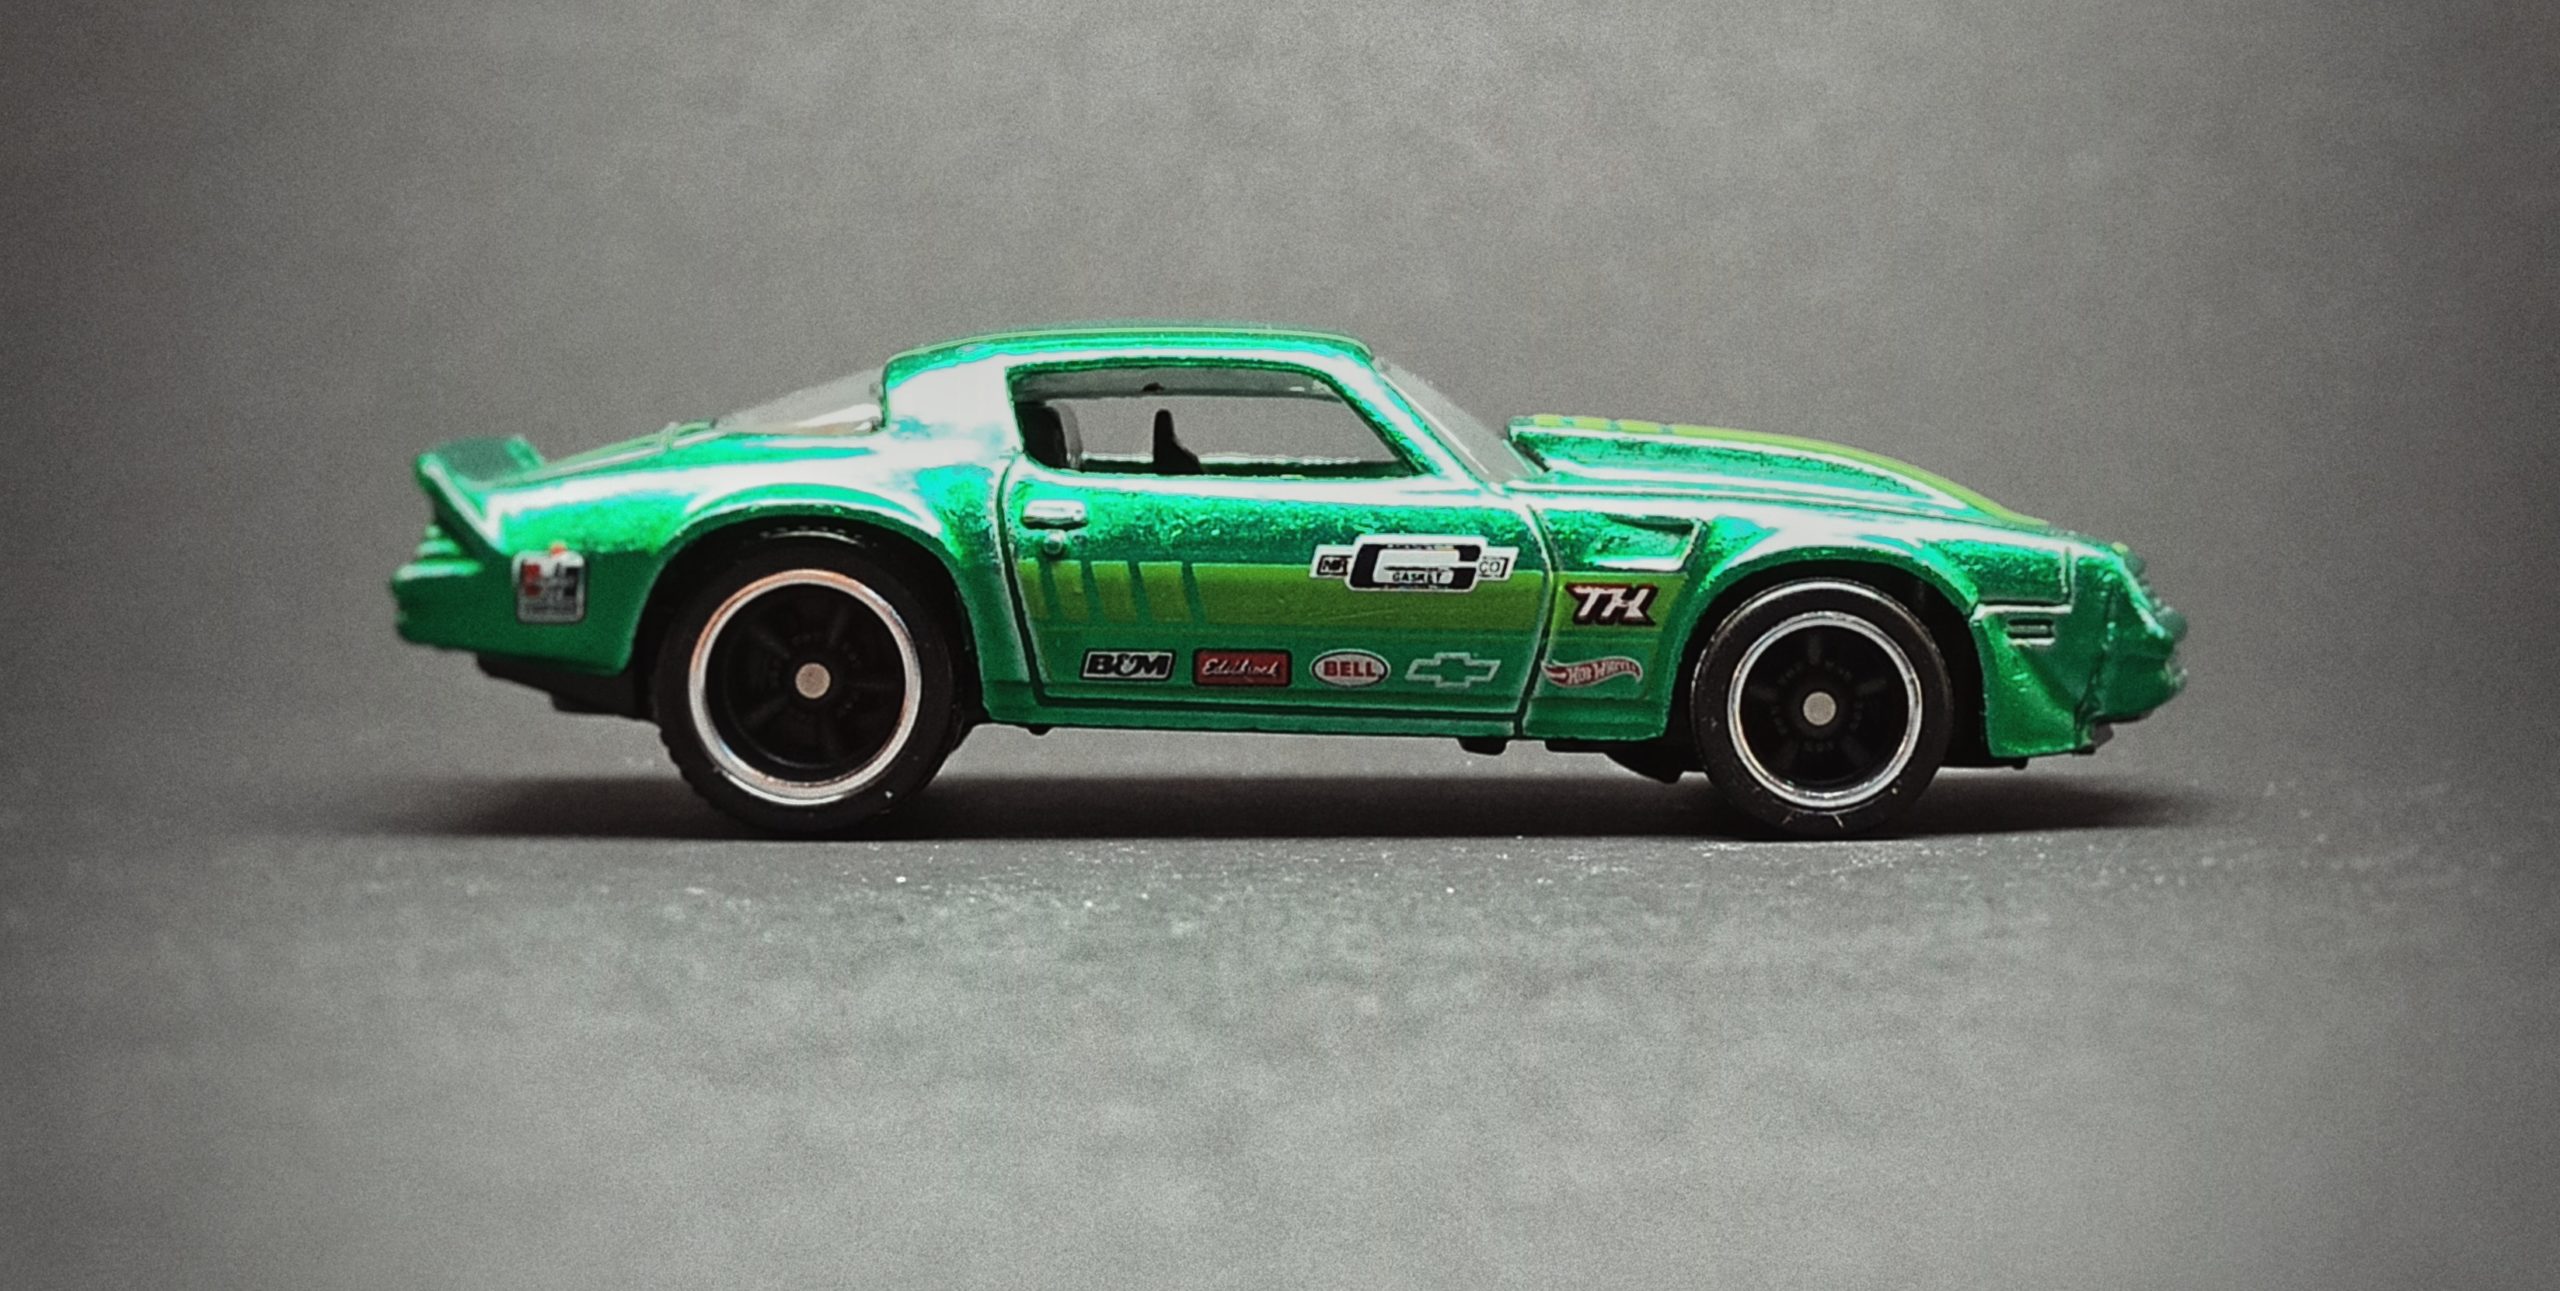 Hot Wheels '81 Camaro (HCY23) 2022 (248/250) Then and Now (10/10) spectraflame green Super Treasure Hunt (STH)